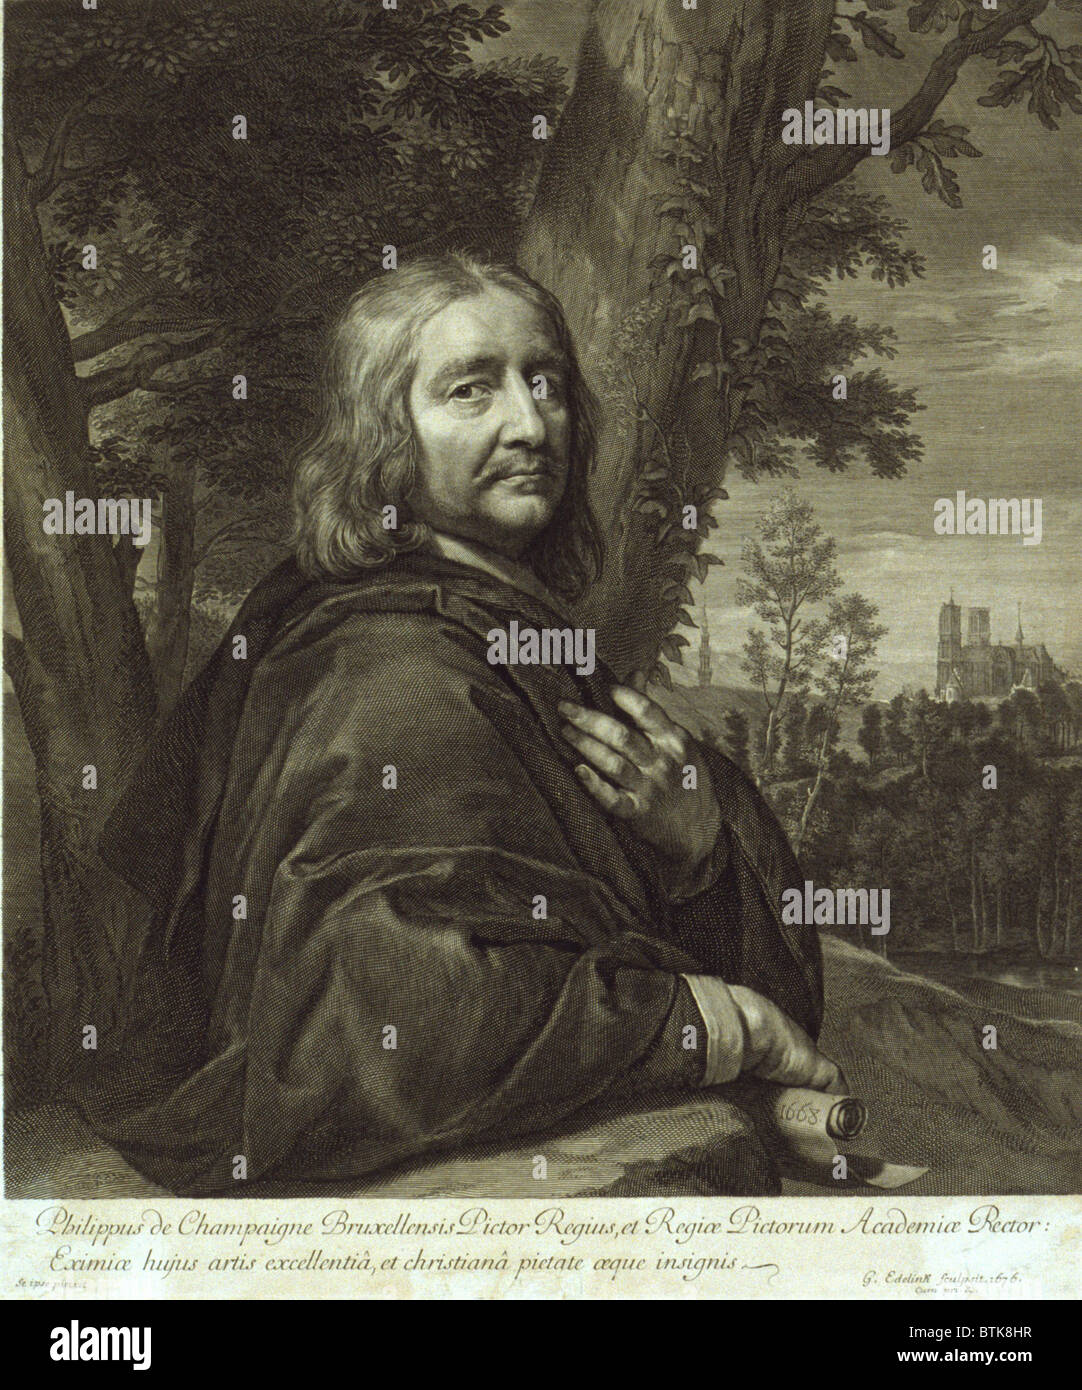 Philippe de Champaigne (1602-1674), French 17th century Baroque painter, based on his self-portrait of 1668. Engraved by Gérard Edelinck, 1676. Stock Photo